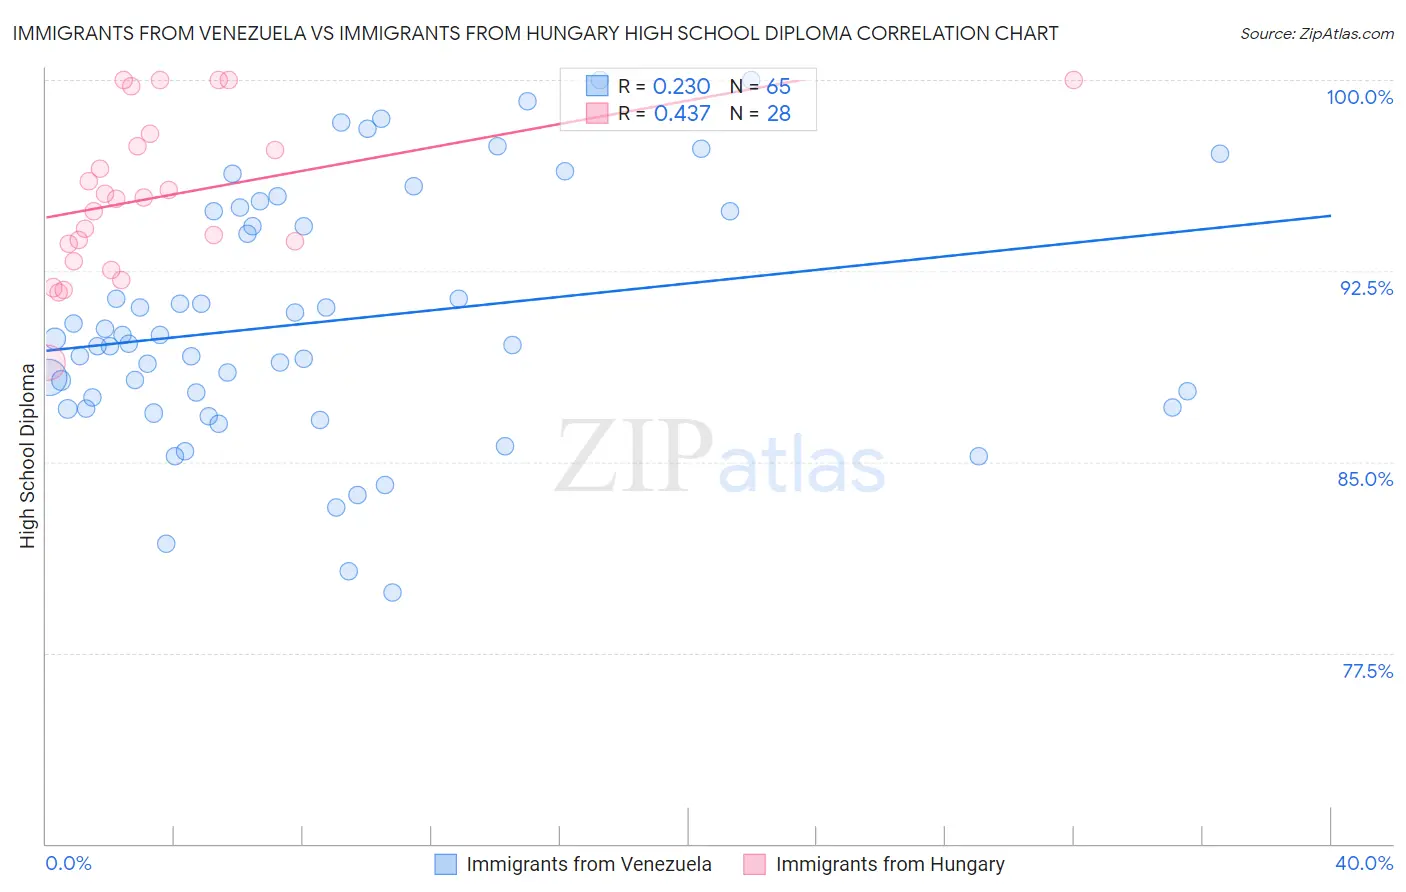 Immigrants from Venezuela vs Immigrants from Hungary High School Diploma